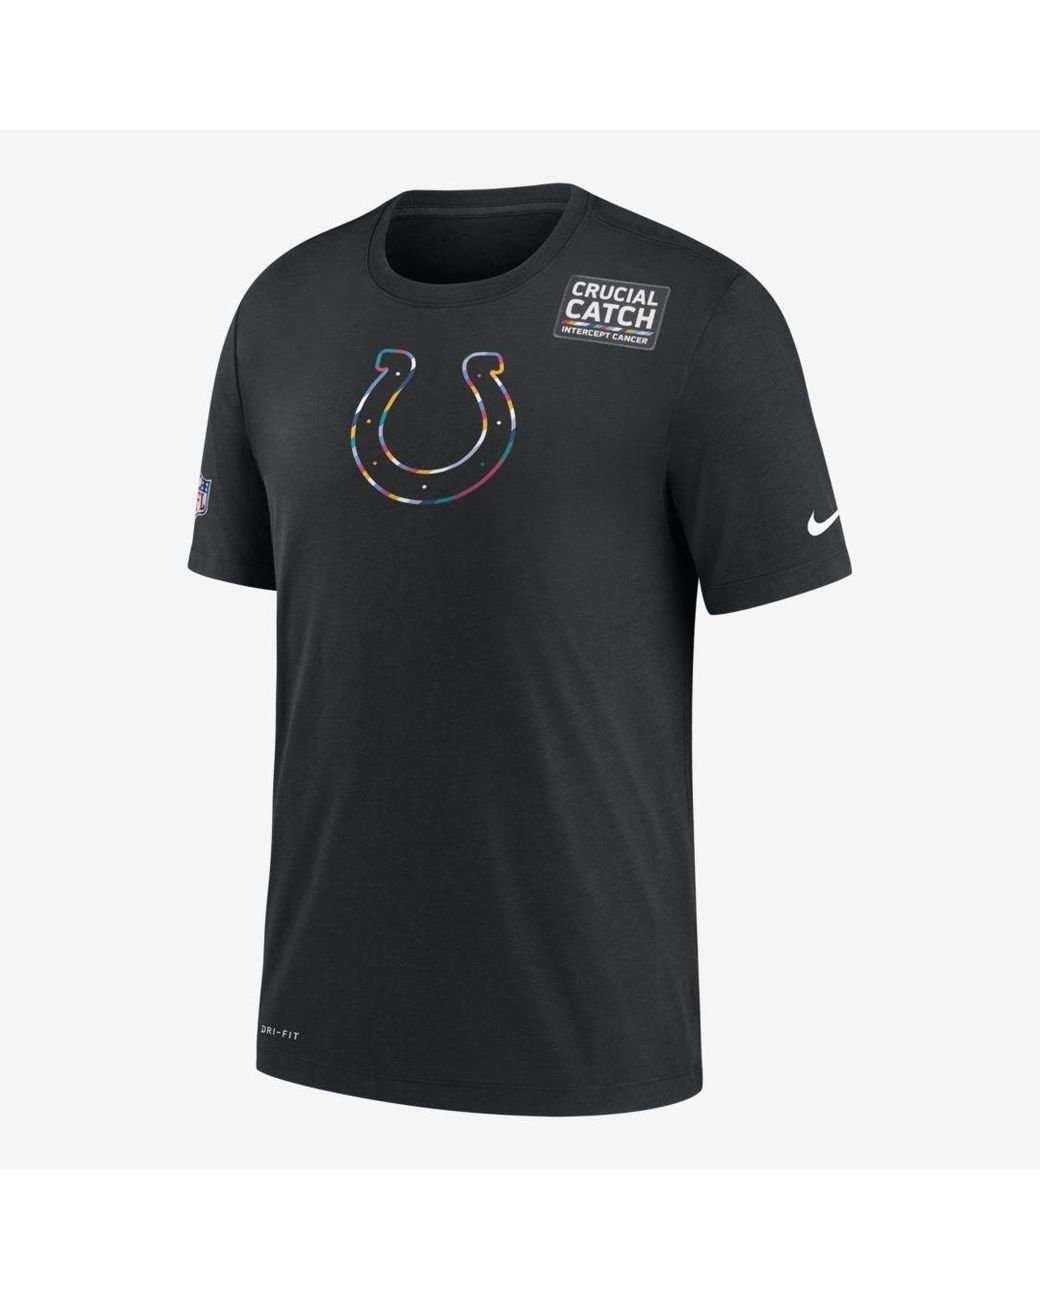 Nike Crucial Catch (nfl Colts) T-shirt (black) for Men - Lyst